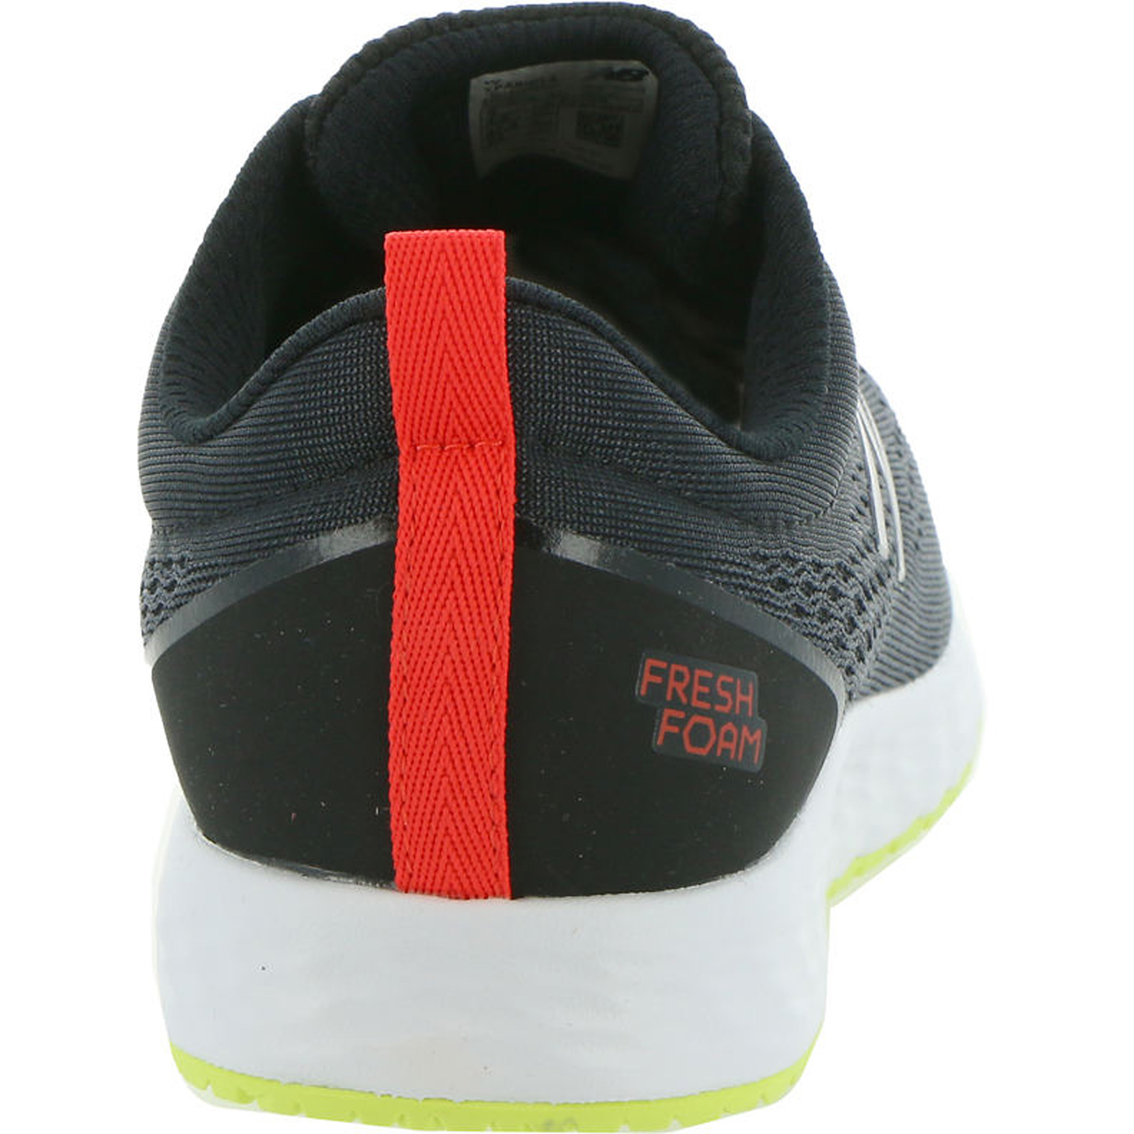 New Balance Grade School Boys YPARICL3 Running Shoes - Image 4 of 6